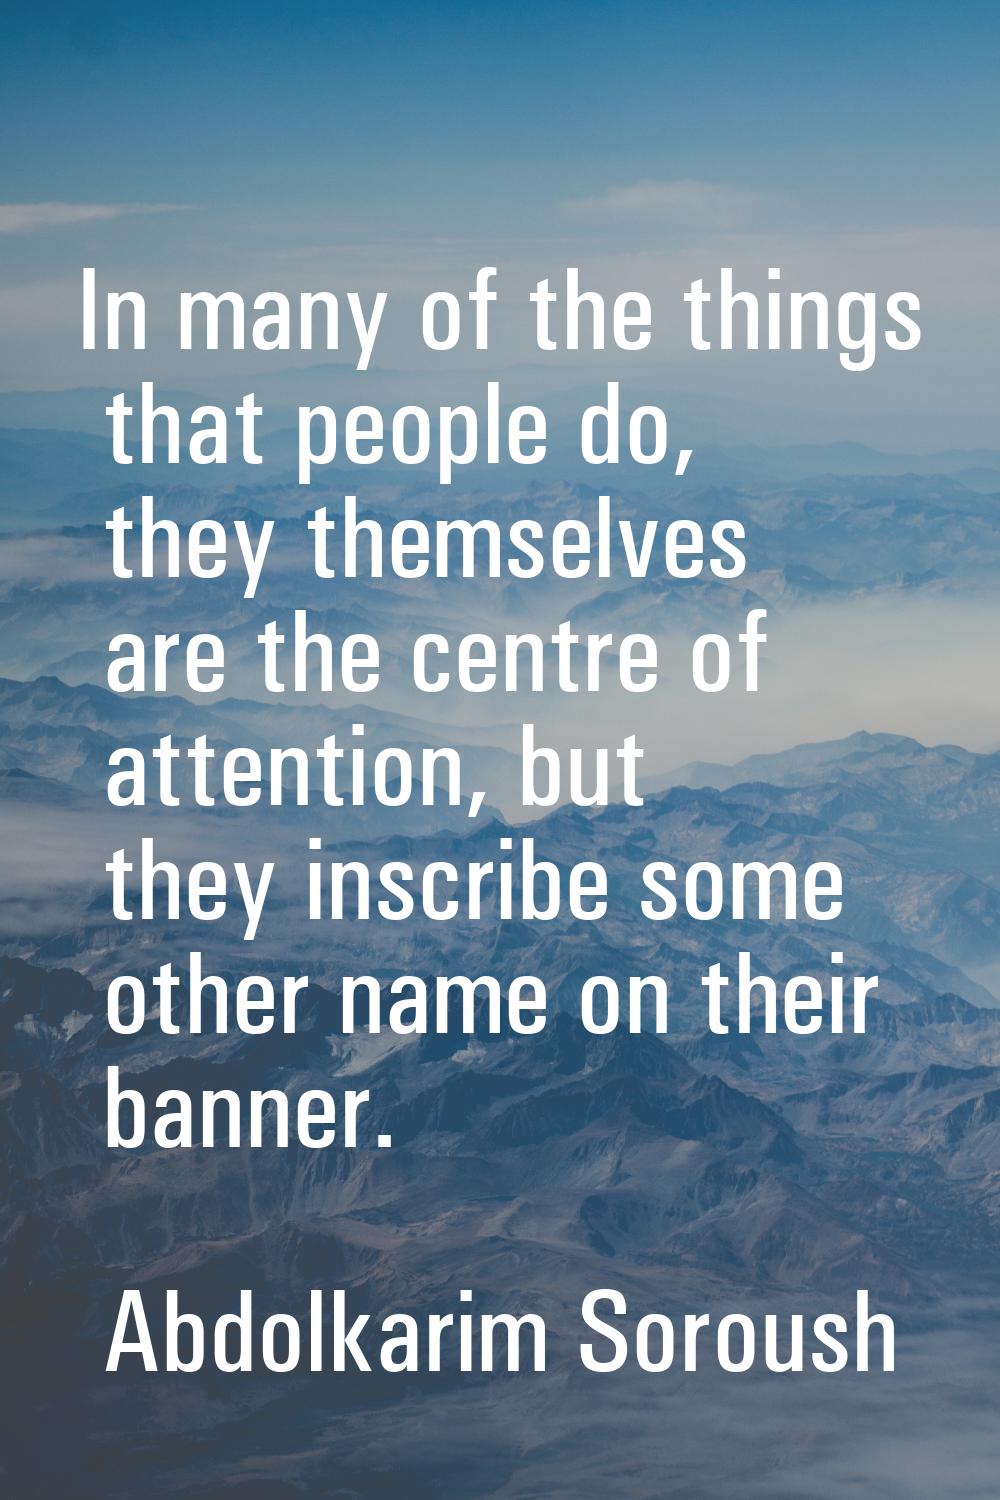 In many of the things that people do, they themselves are the centre of attention, but they inscrib